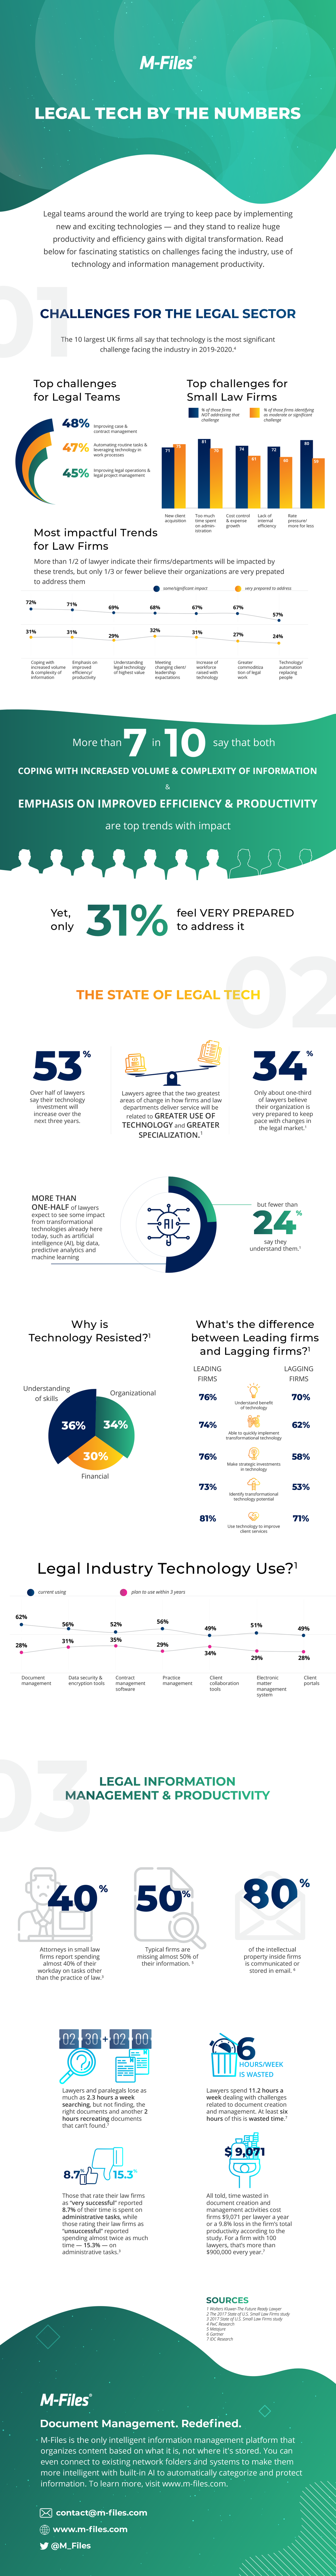 Legal-Tech-By-the-Numbers